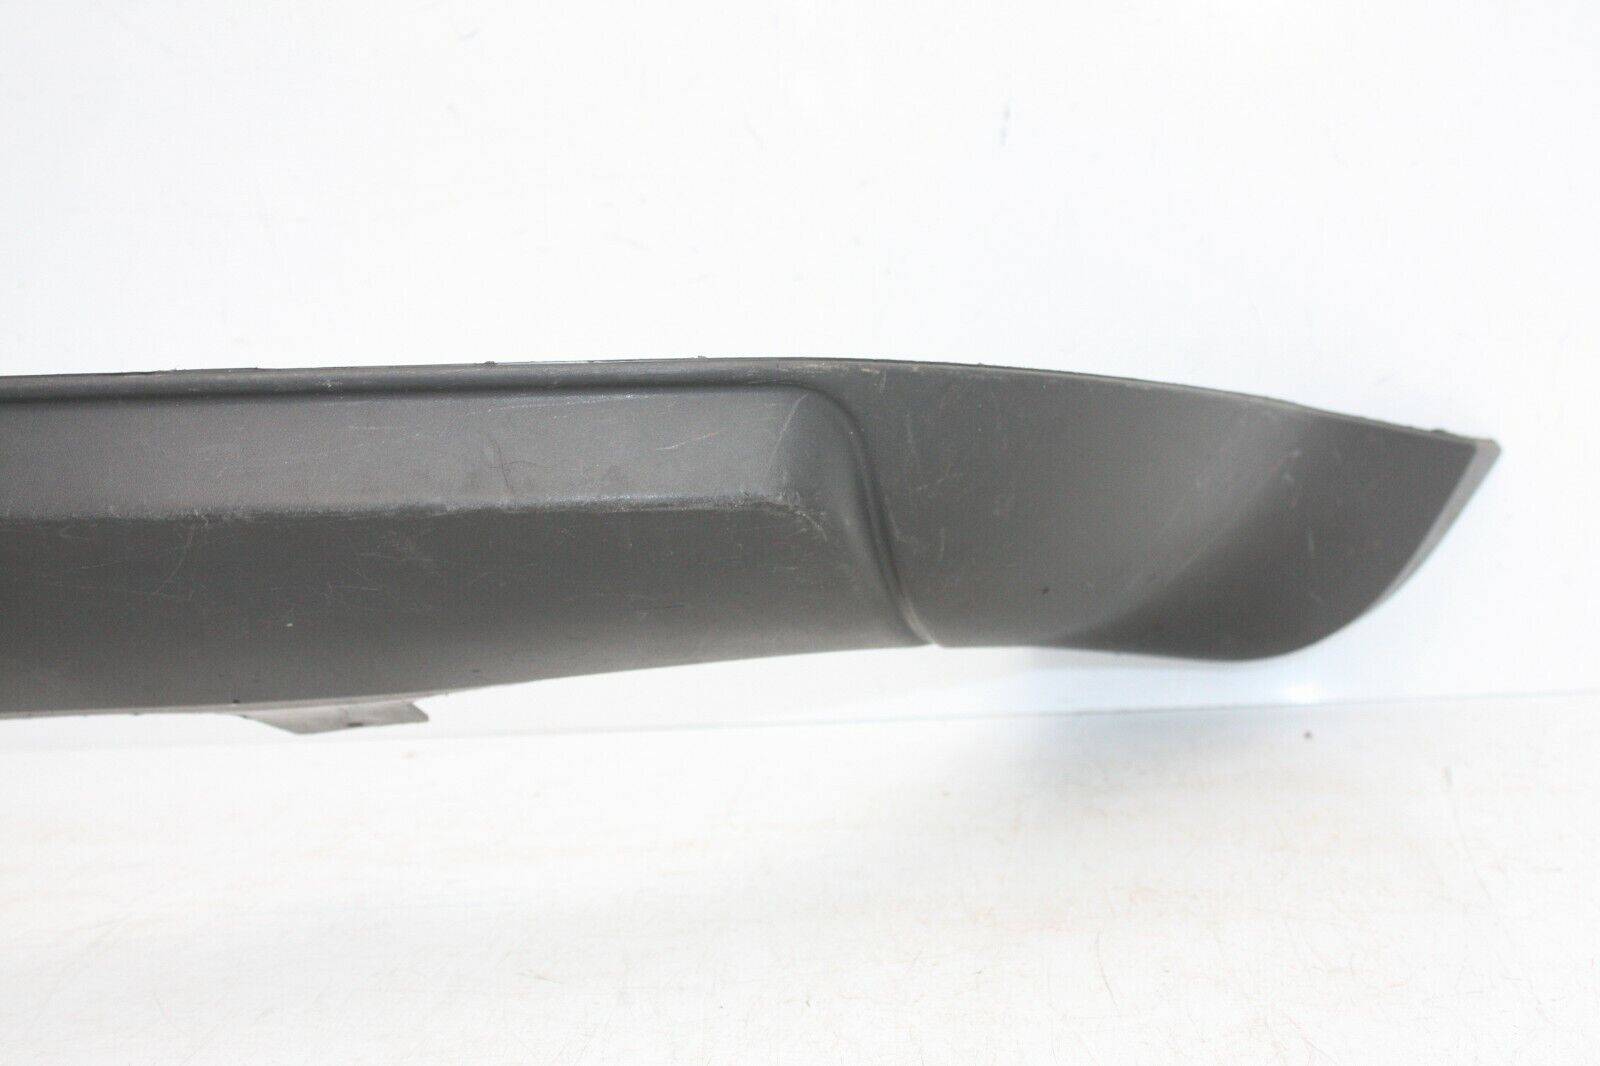 Ford-C-Max-Rear-Bumper-Lower-Section-2004-To-2007-3M51-R17A894-AB-175902867116-4